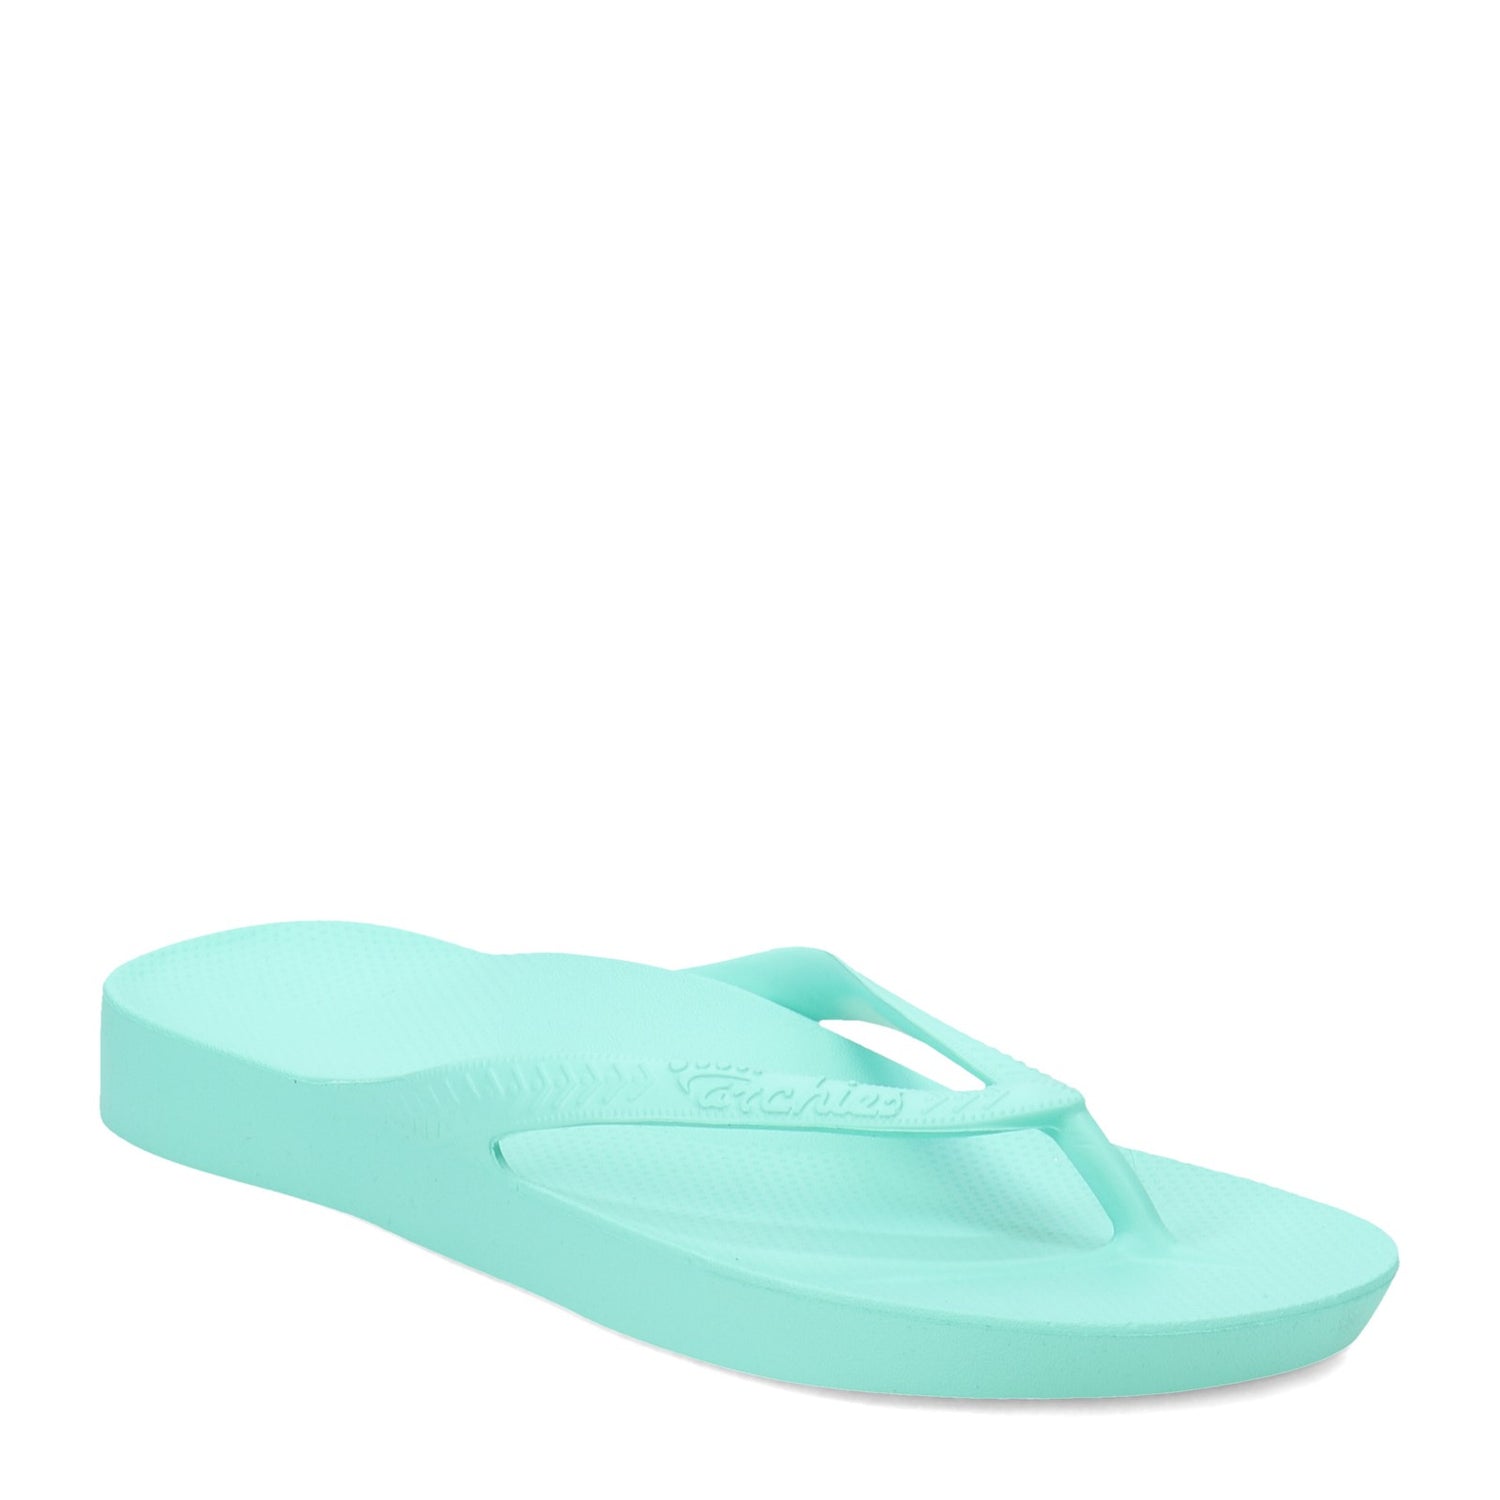 Archies Arch Support Flip Flops in Coral – Tenni Moc's Shoe Store